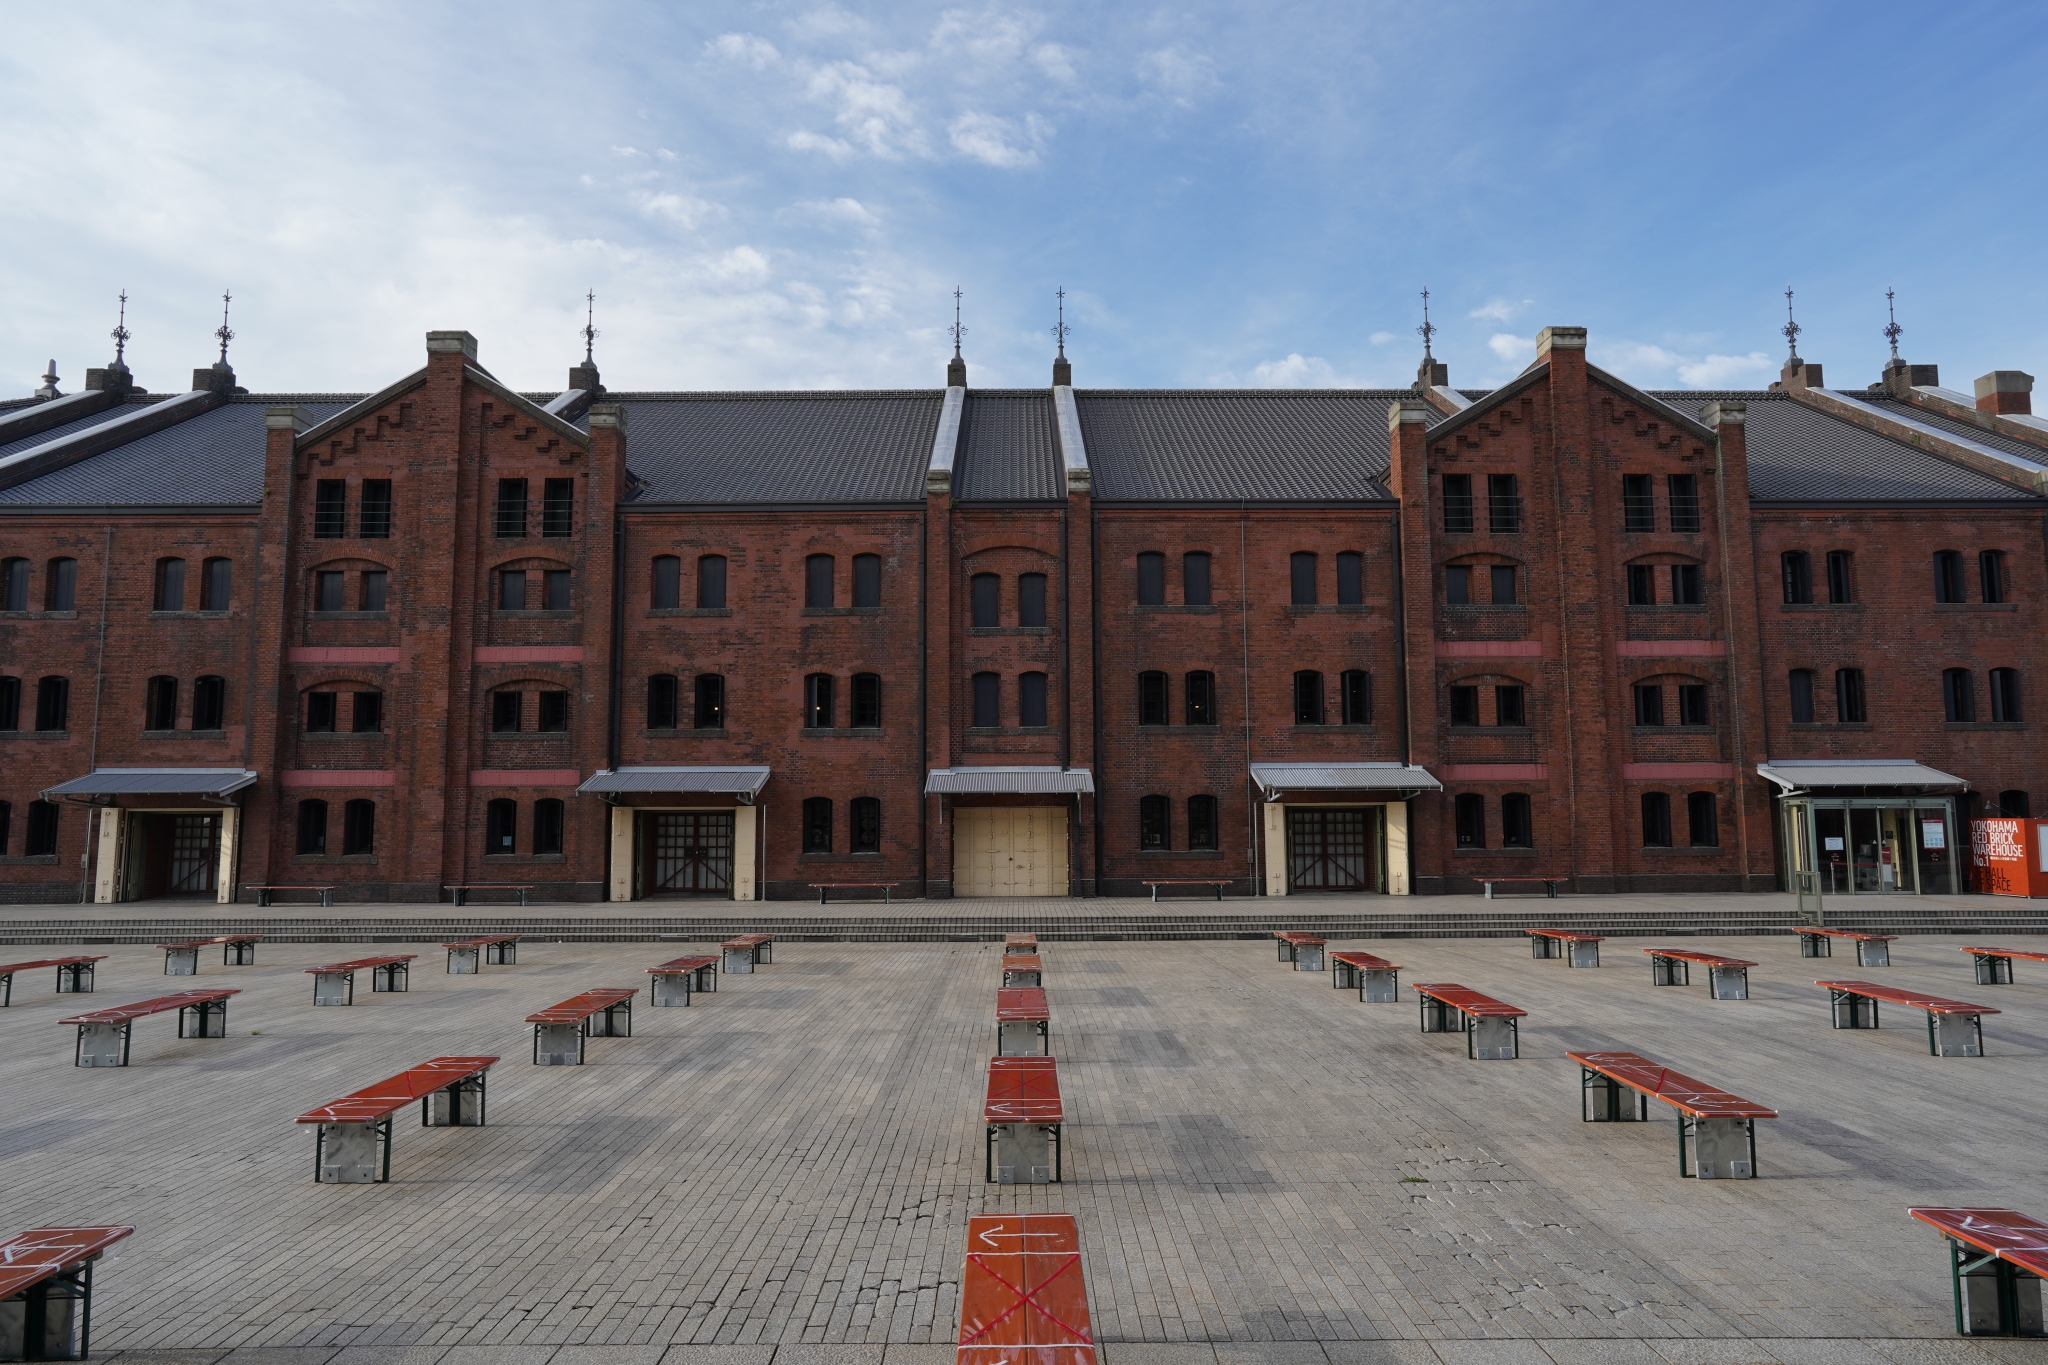 Wide red brick building and benches laid out systematically in front of it